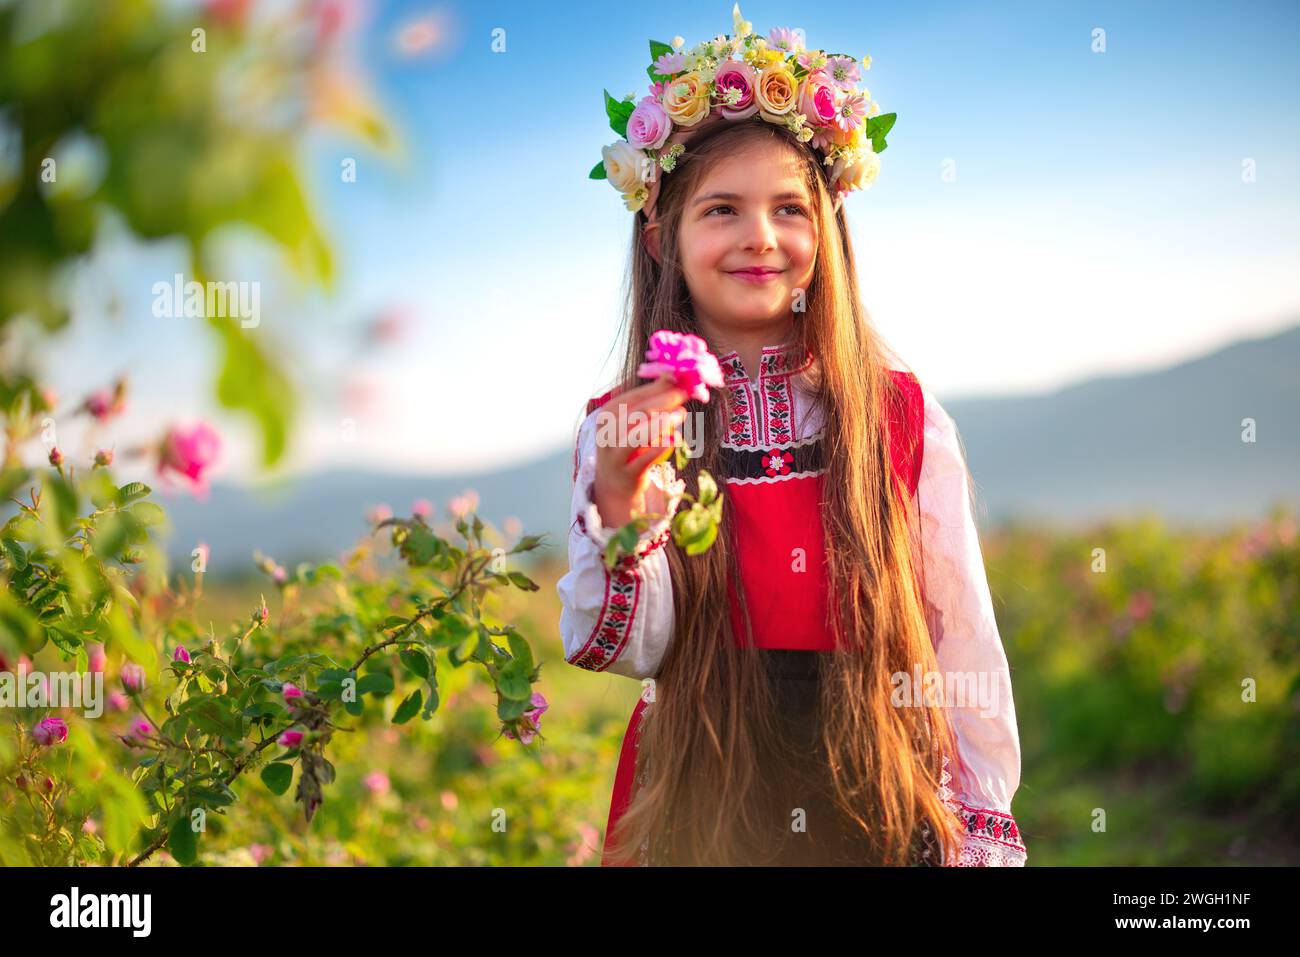 Bulgarian girl symbol of bulgarian beauty and strong spirit in rose field of oil bearing roses damascena Stock Photo